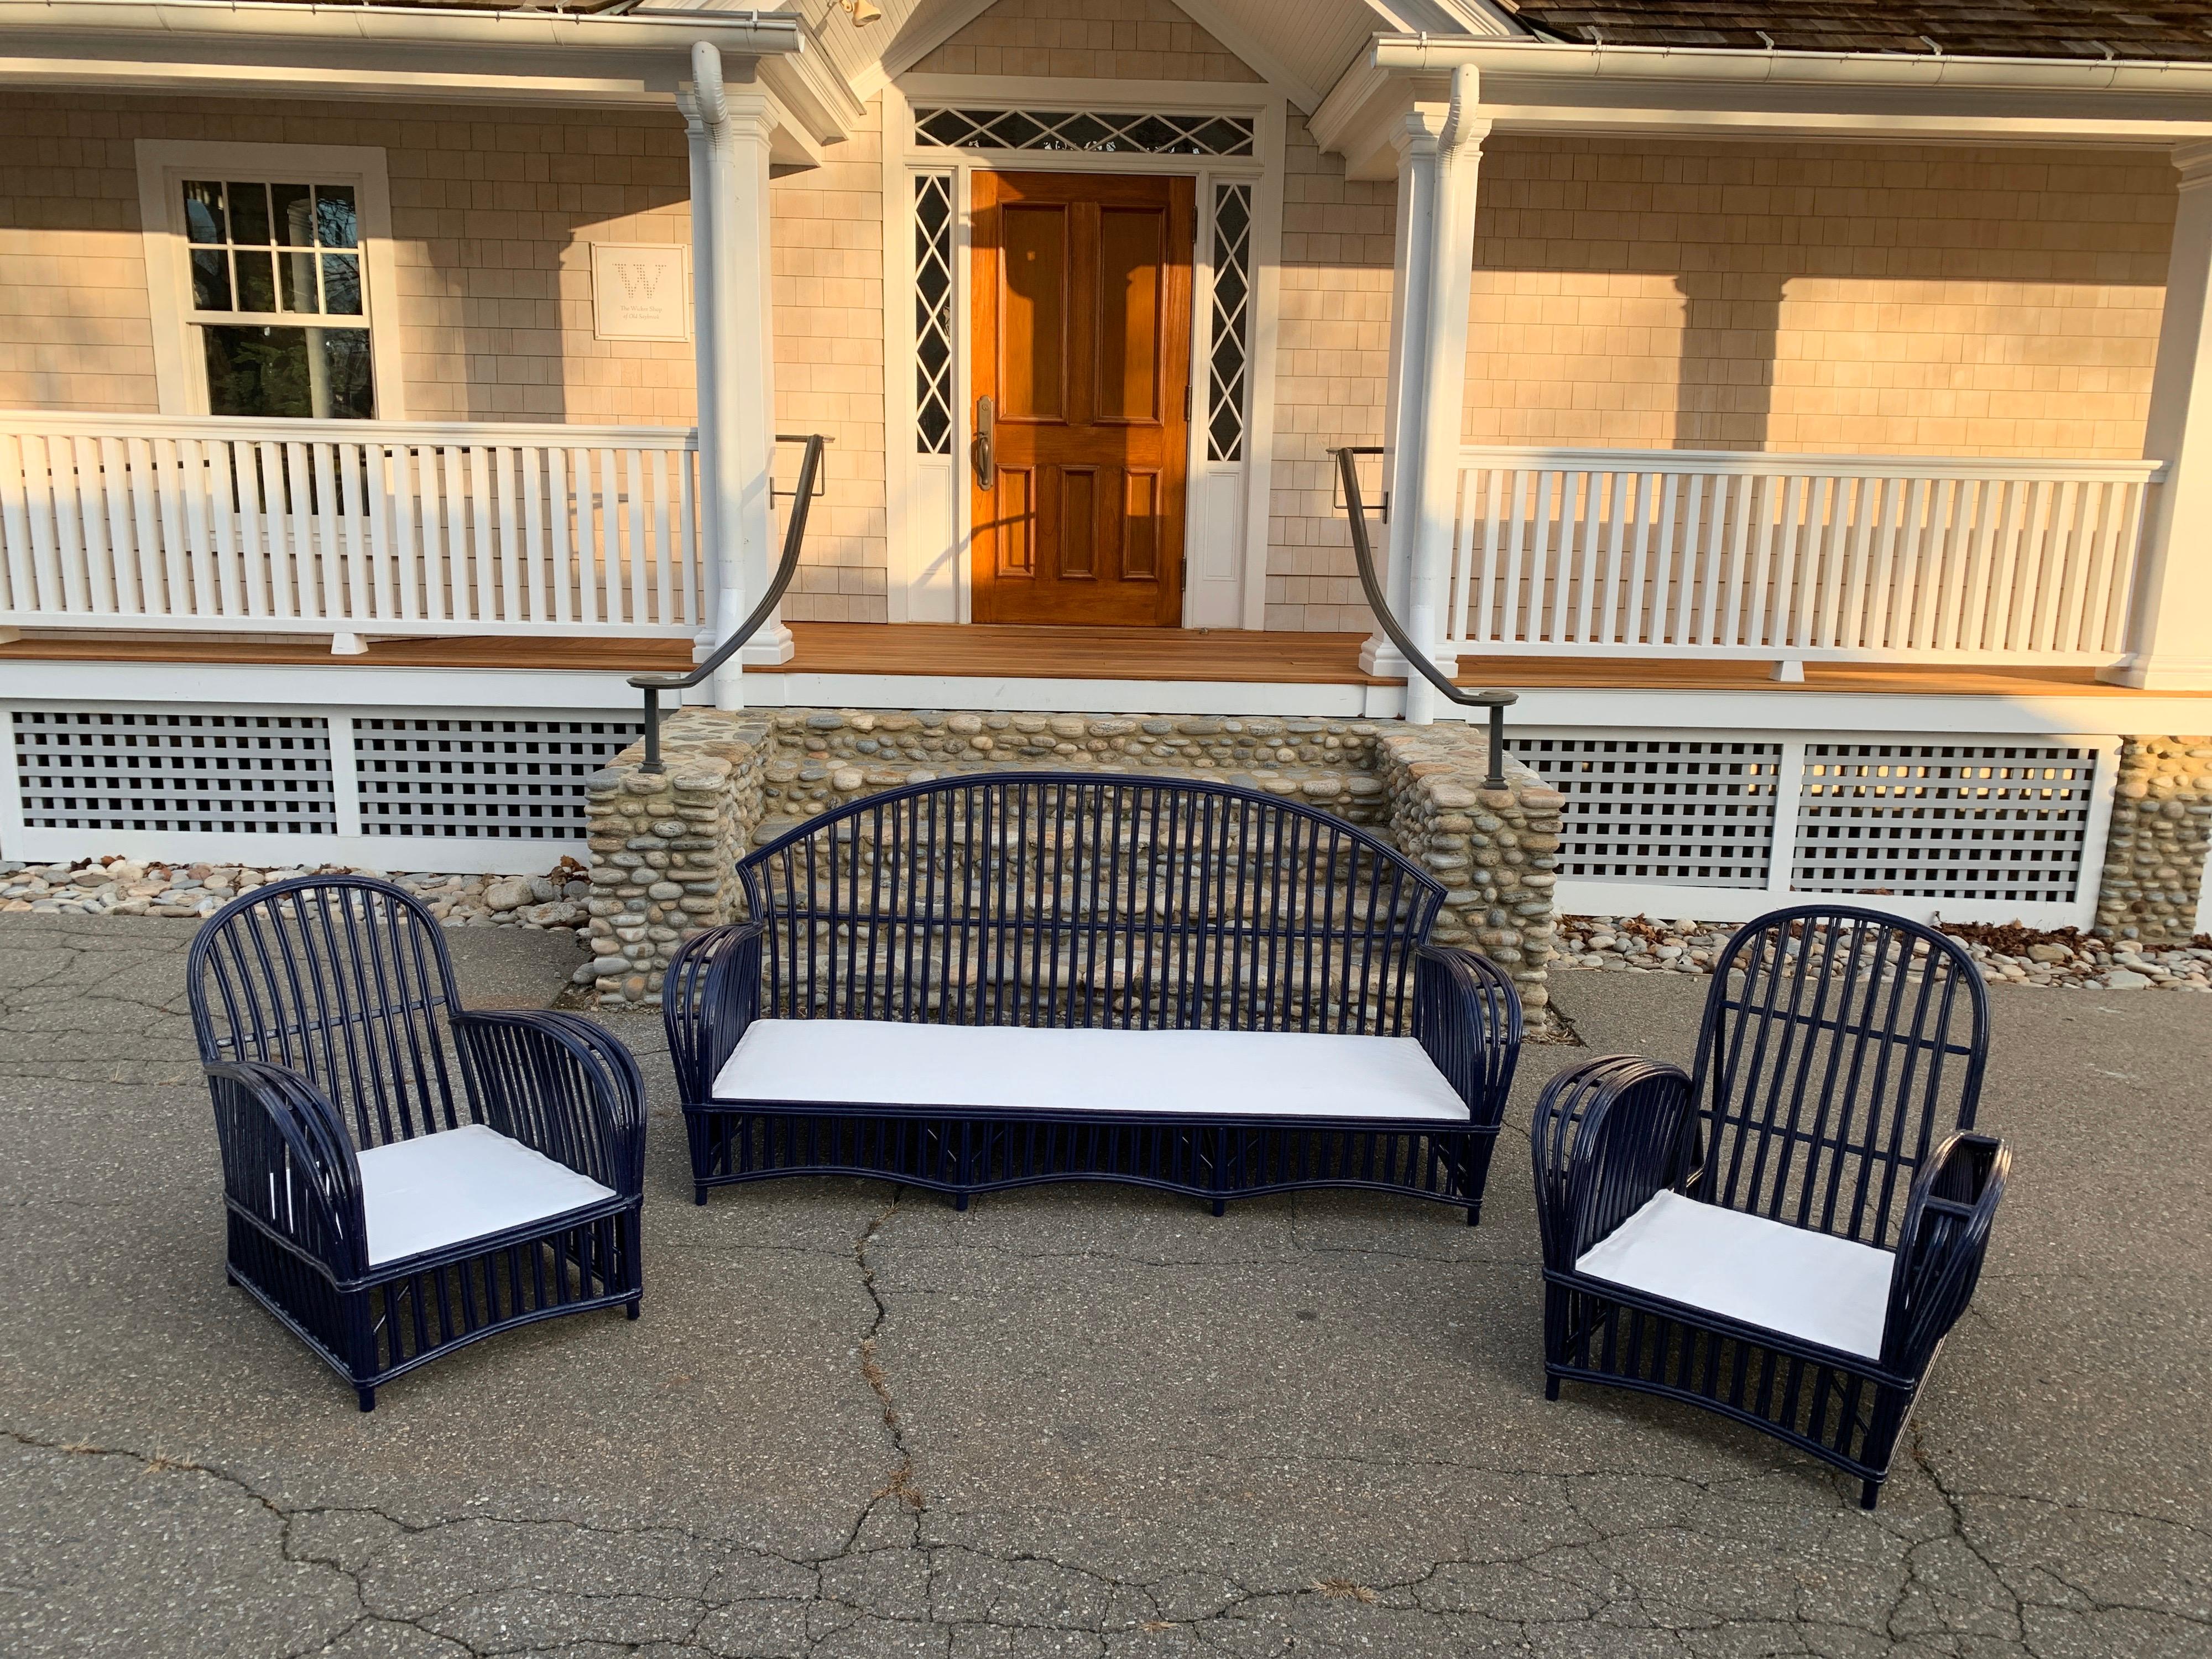 Vintage stick rattan set newly painted in Benjamin Moore Admiral blue. Additional chairs are available and can be painted to match. Sofa measures 82